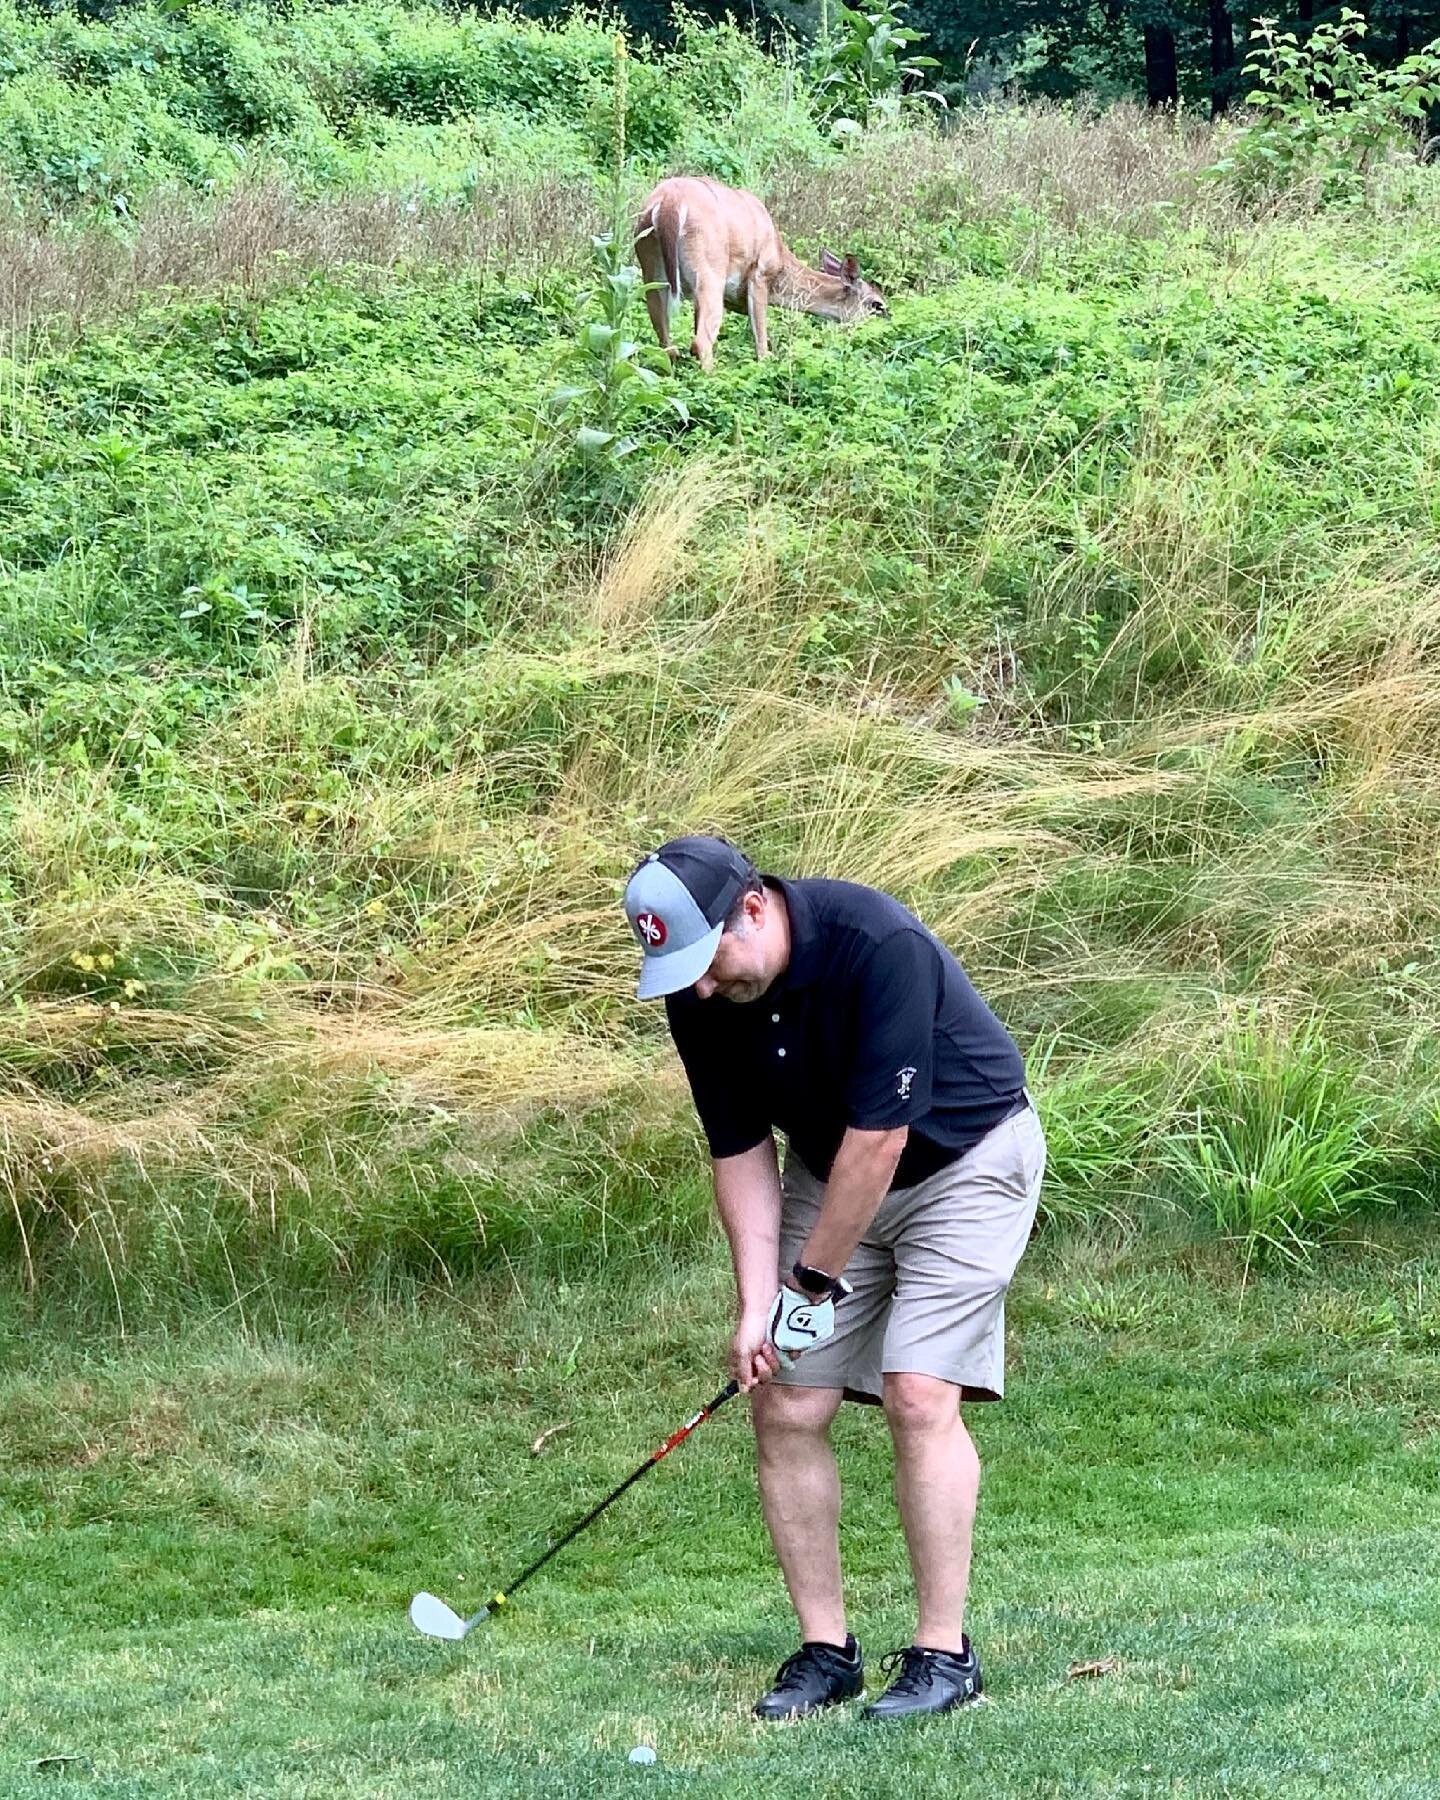 Chef @chefmikeanthony @gramercytavern is trying to concentrate on making this very difficult chip shot on to the green, but can&rsquo;t help being distracted by the venison right behind him which he could surprise @chef_alexlee with @alpinecountryclu